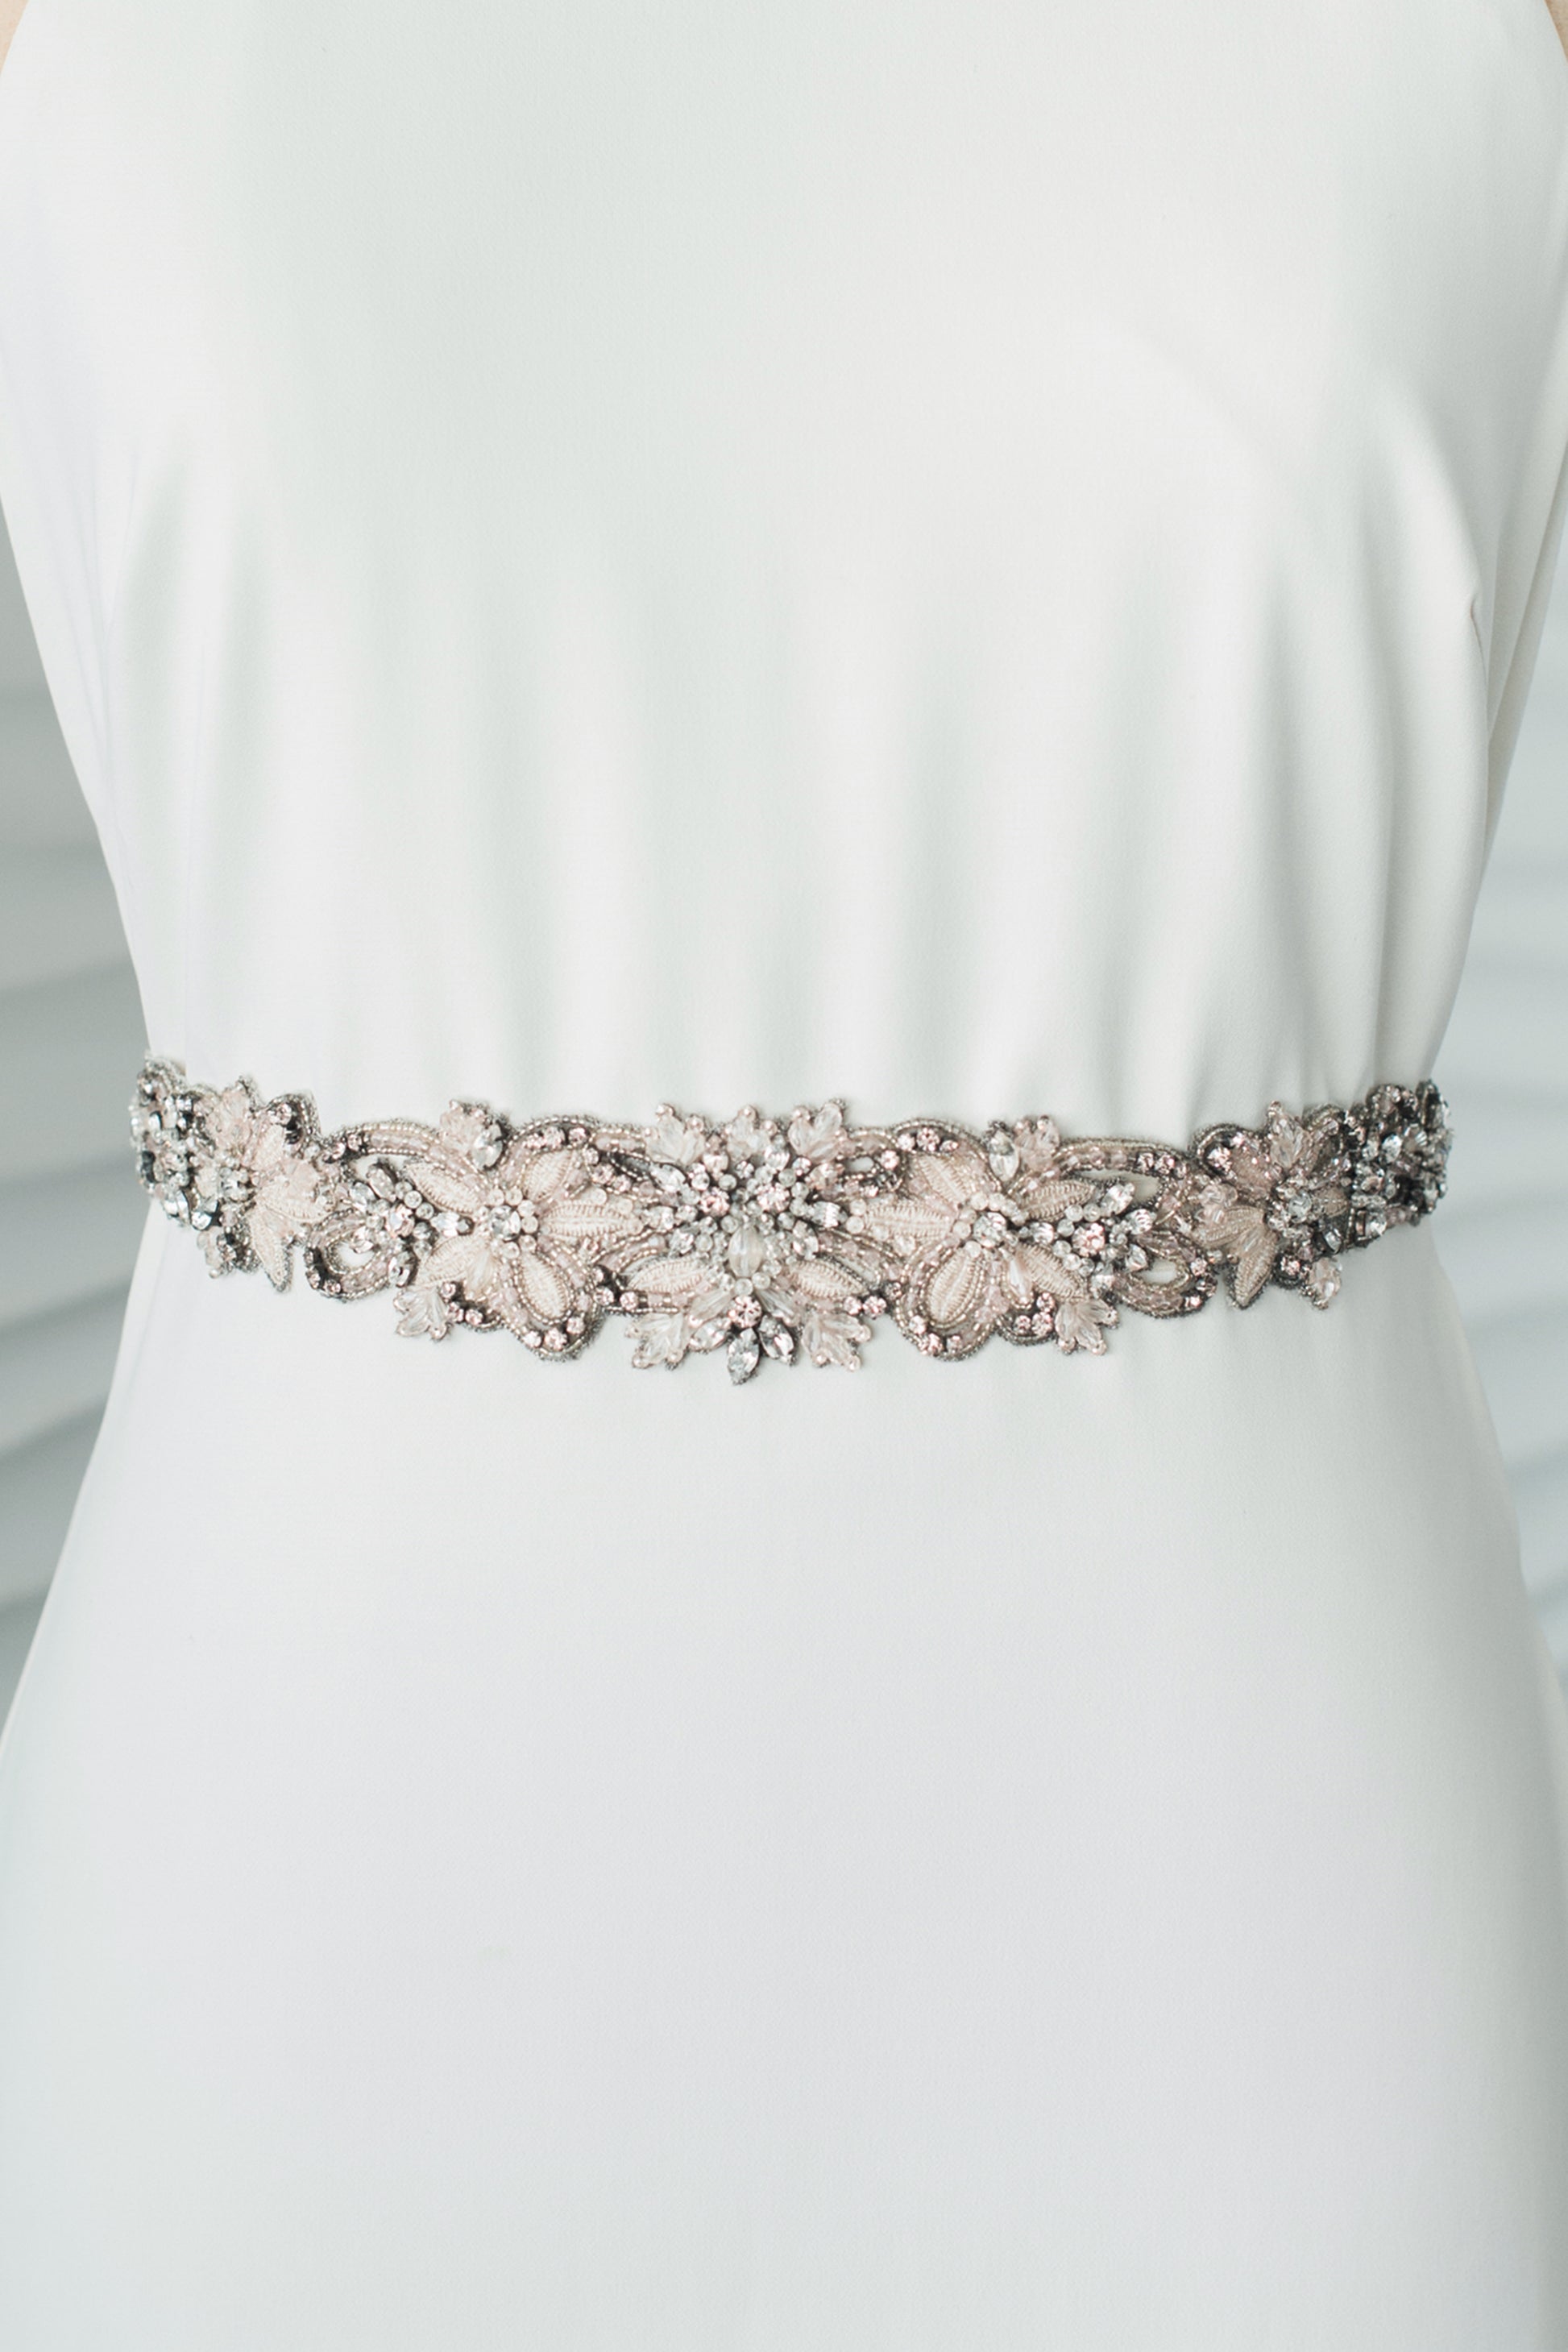 Blush Bridal Sash Floral Wedding Belt Champagne Flower Beaded Trim Vintage Crystal Applique Pink Embroidered Gunmetal Art Deco Belt, JOELLE SASH  for Her, for Bride, for Bridesmaid Gift , for Mother of the Bride, for Wedding Guest or Special Occasion by Camilla Christine Bridal Jewelry and Wedding Accessories. Bridal Style Inspiration Trends for Bride, Wedding Ideas